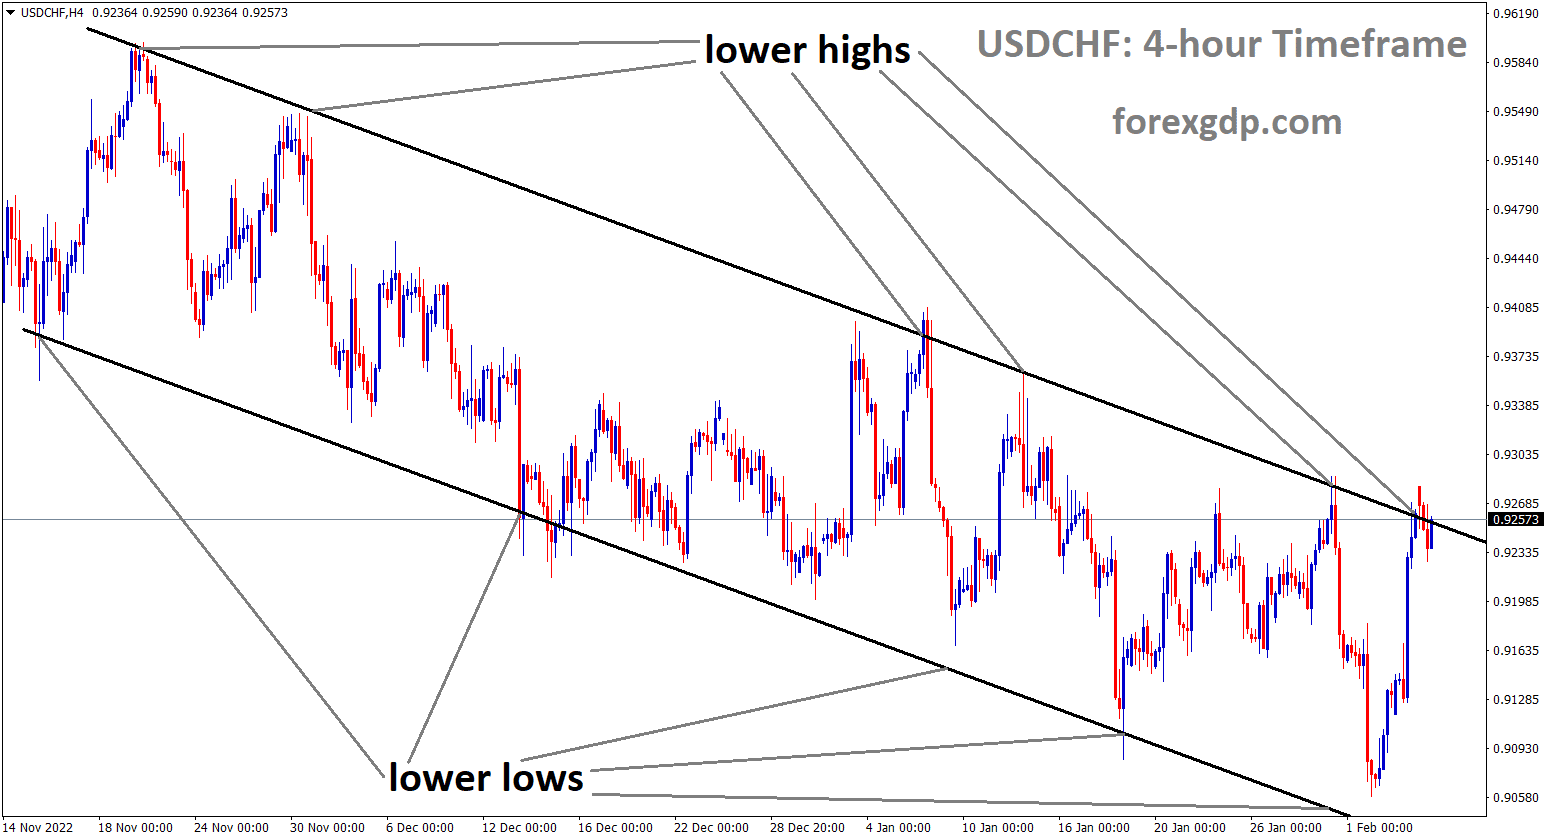 USDCHF is moving in Descending Channel and the market has reached the lower high area of the channel.